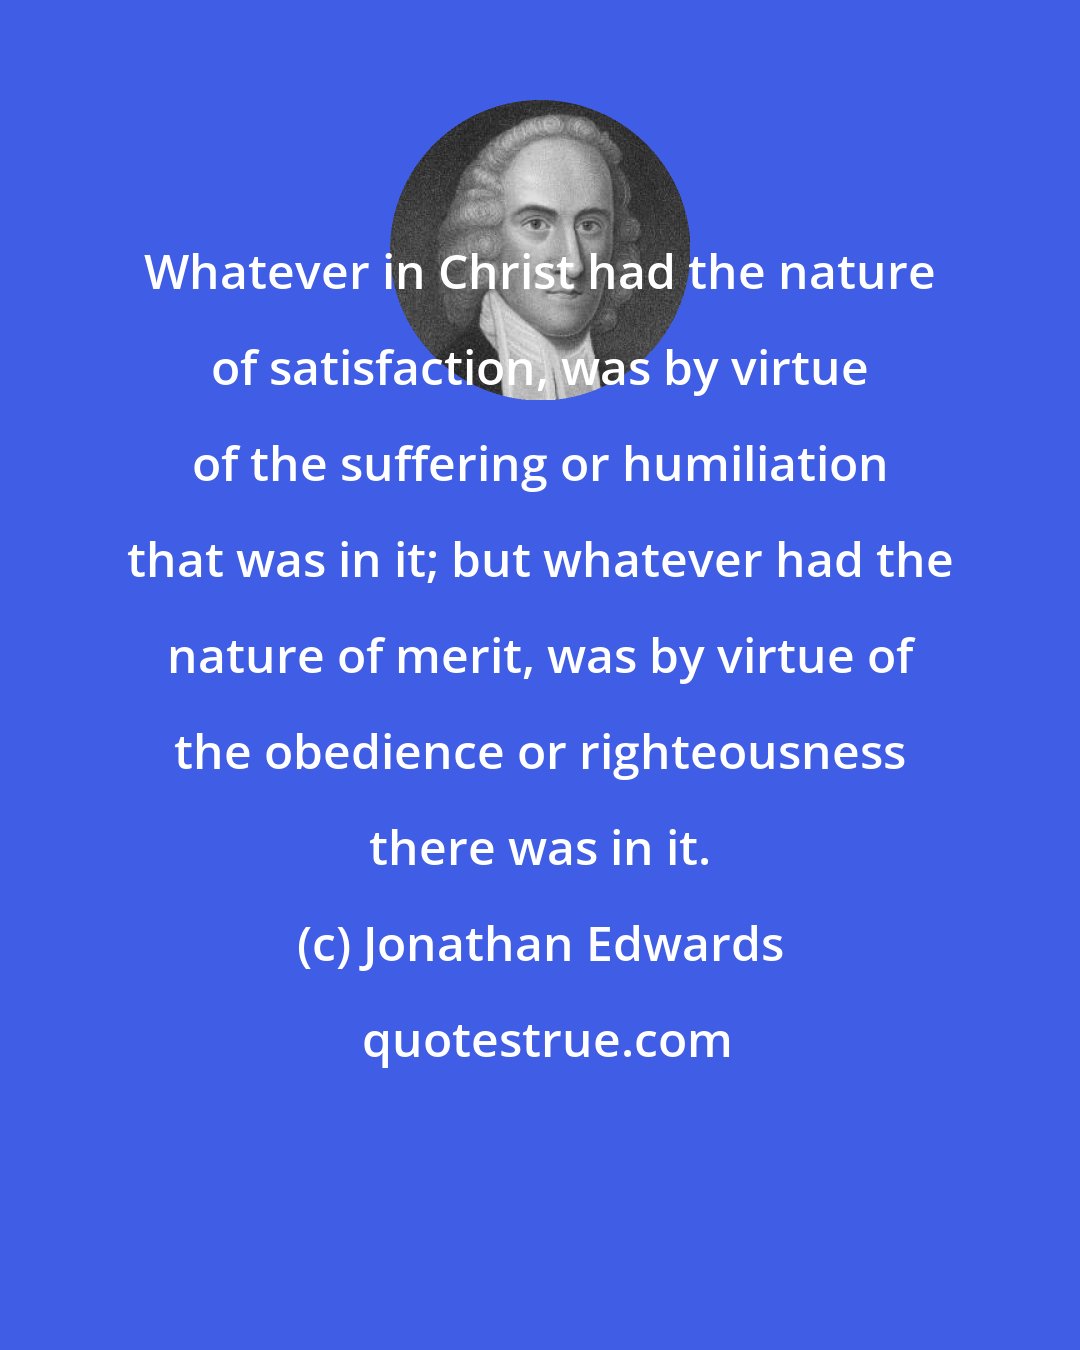 Jonathan Edwards: Whatever in Christ had the nature of satisfaction, was by virtue of the suffering or humiliation that was in it; but whatever had the nature of merit, was by virtue of the obedience or righteousness there was in it.